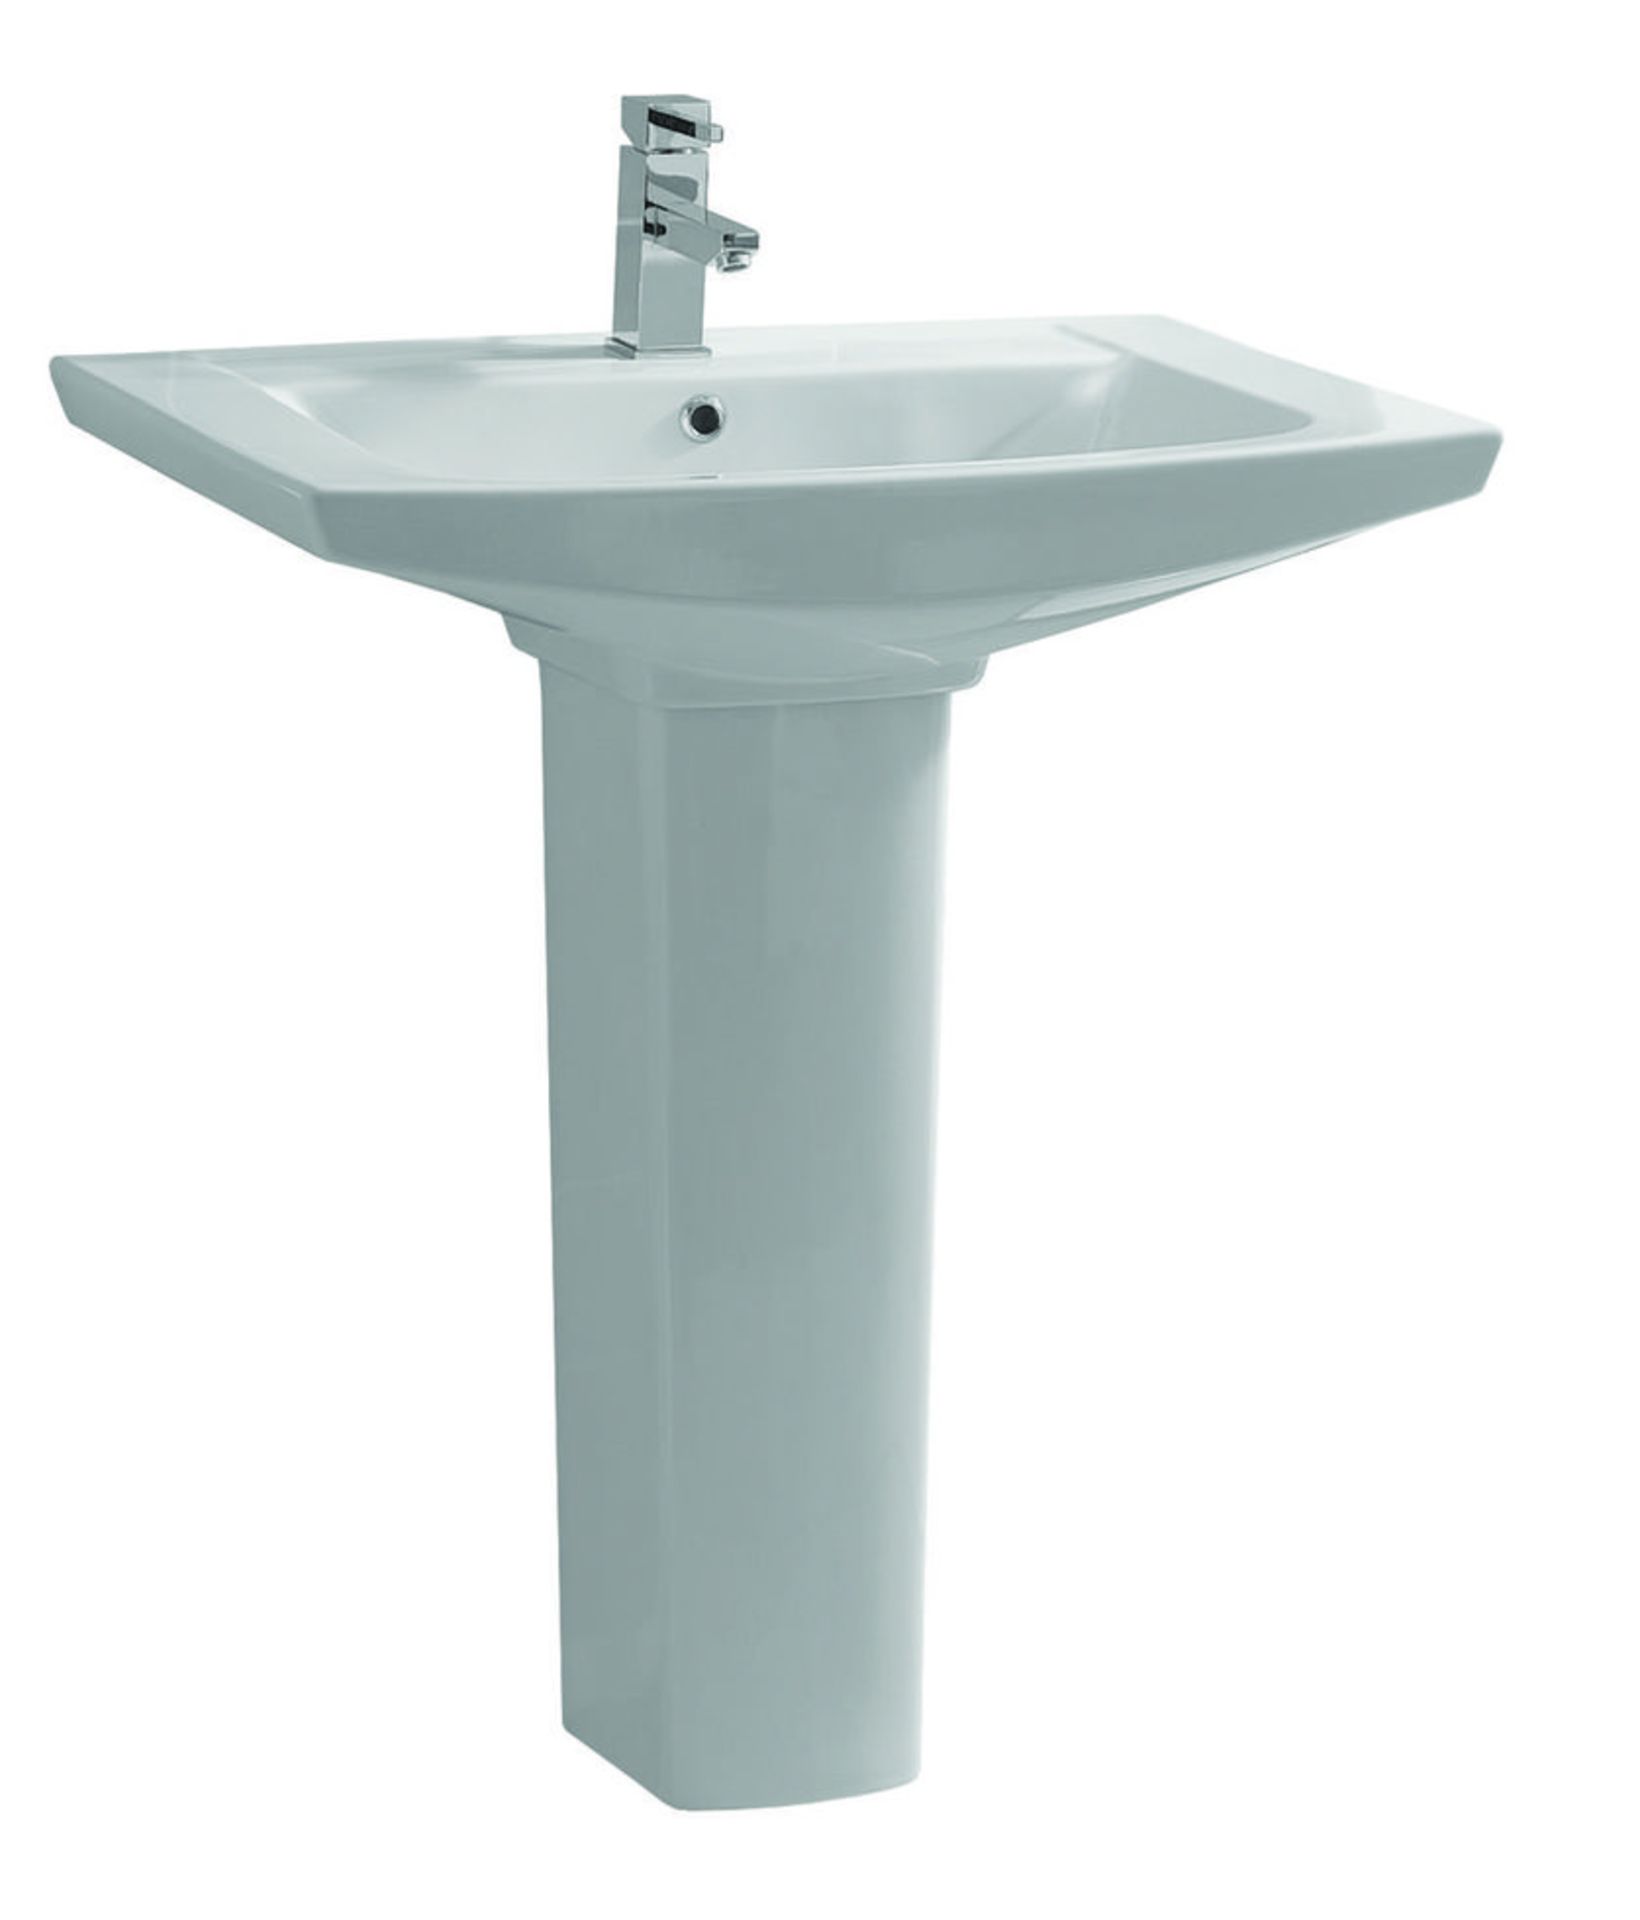 20 x Vogue Bathrooms CAPRICE Single Tap Hole SINK BASINS With Full Pedestals - Vogue Bathrooms - - Image 2 of 3